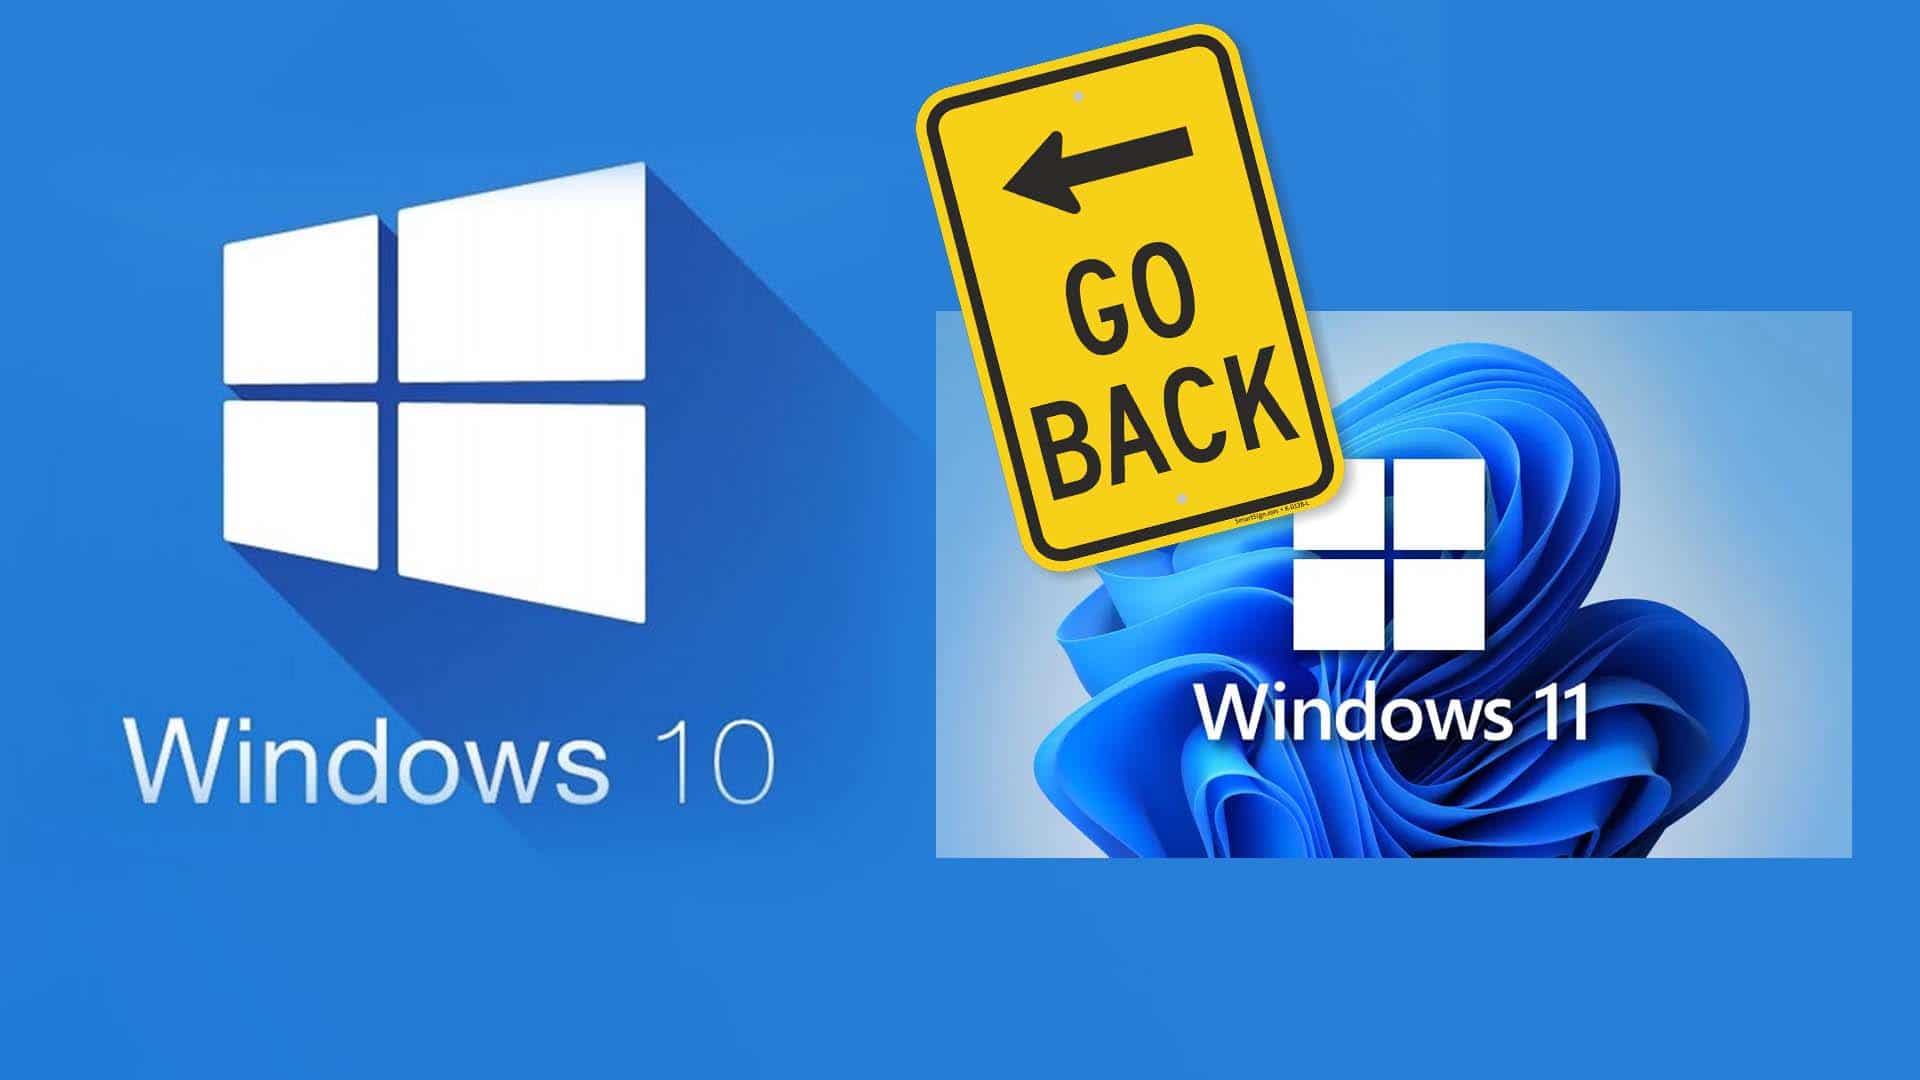 restore windows pro after downgrading to windows 10 home